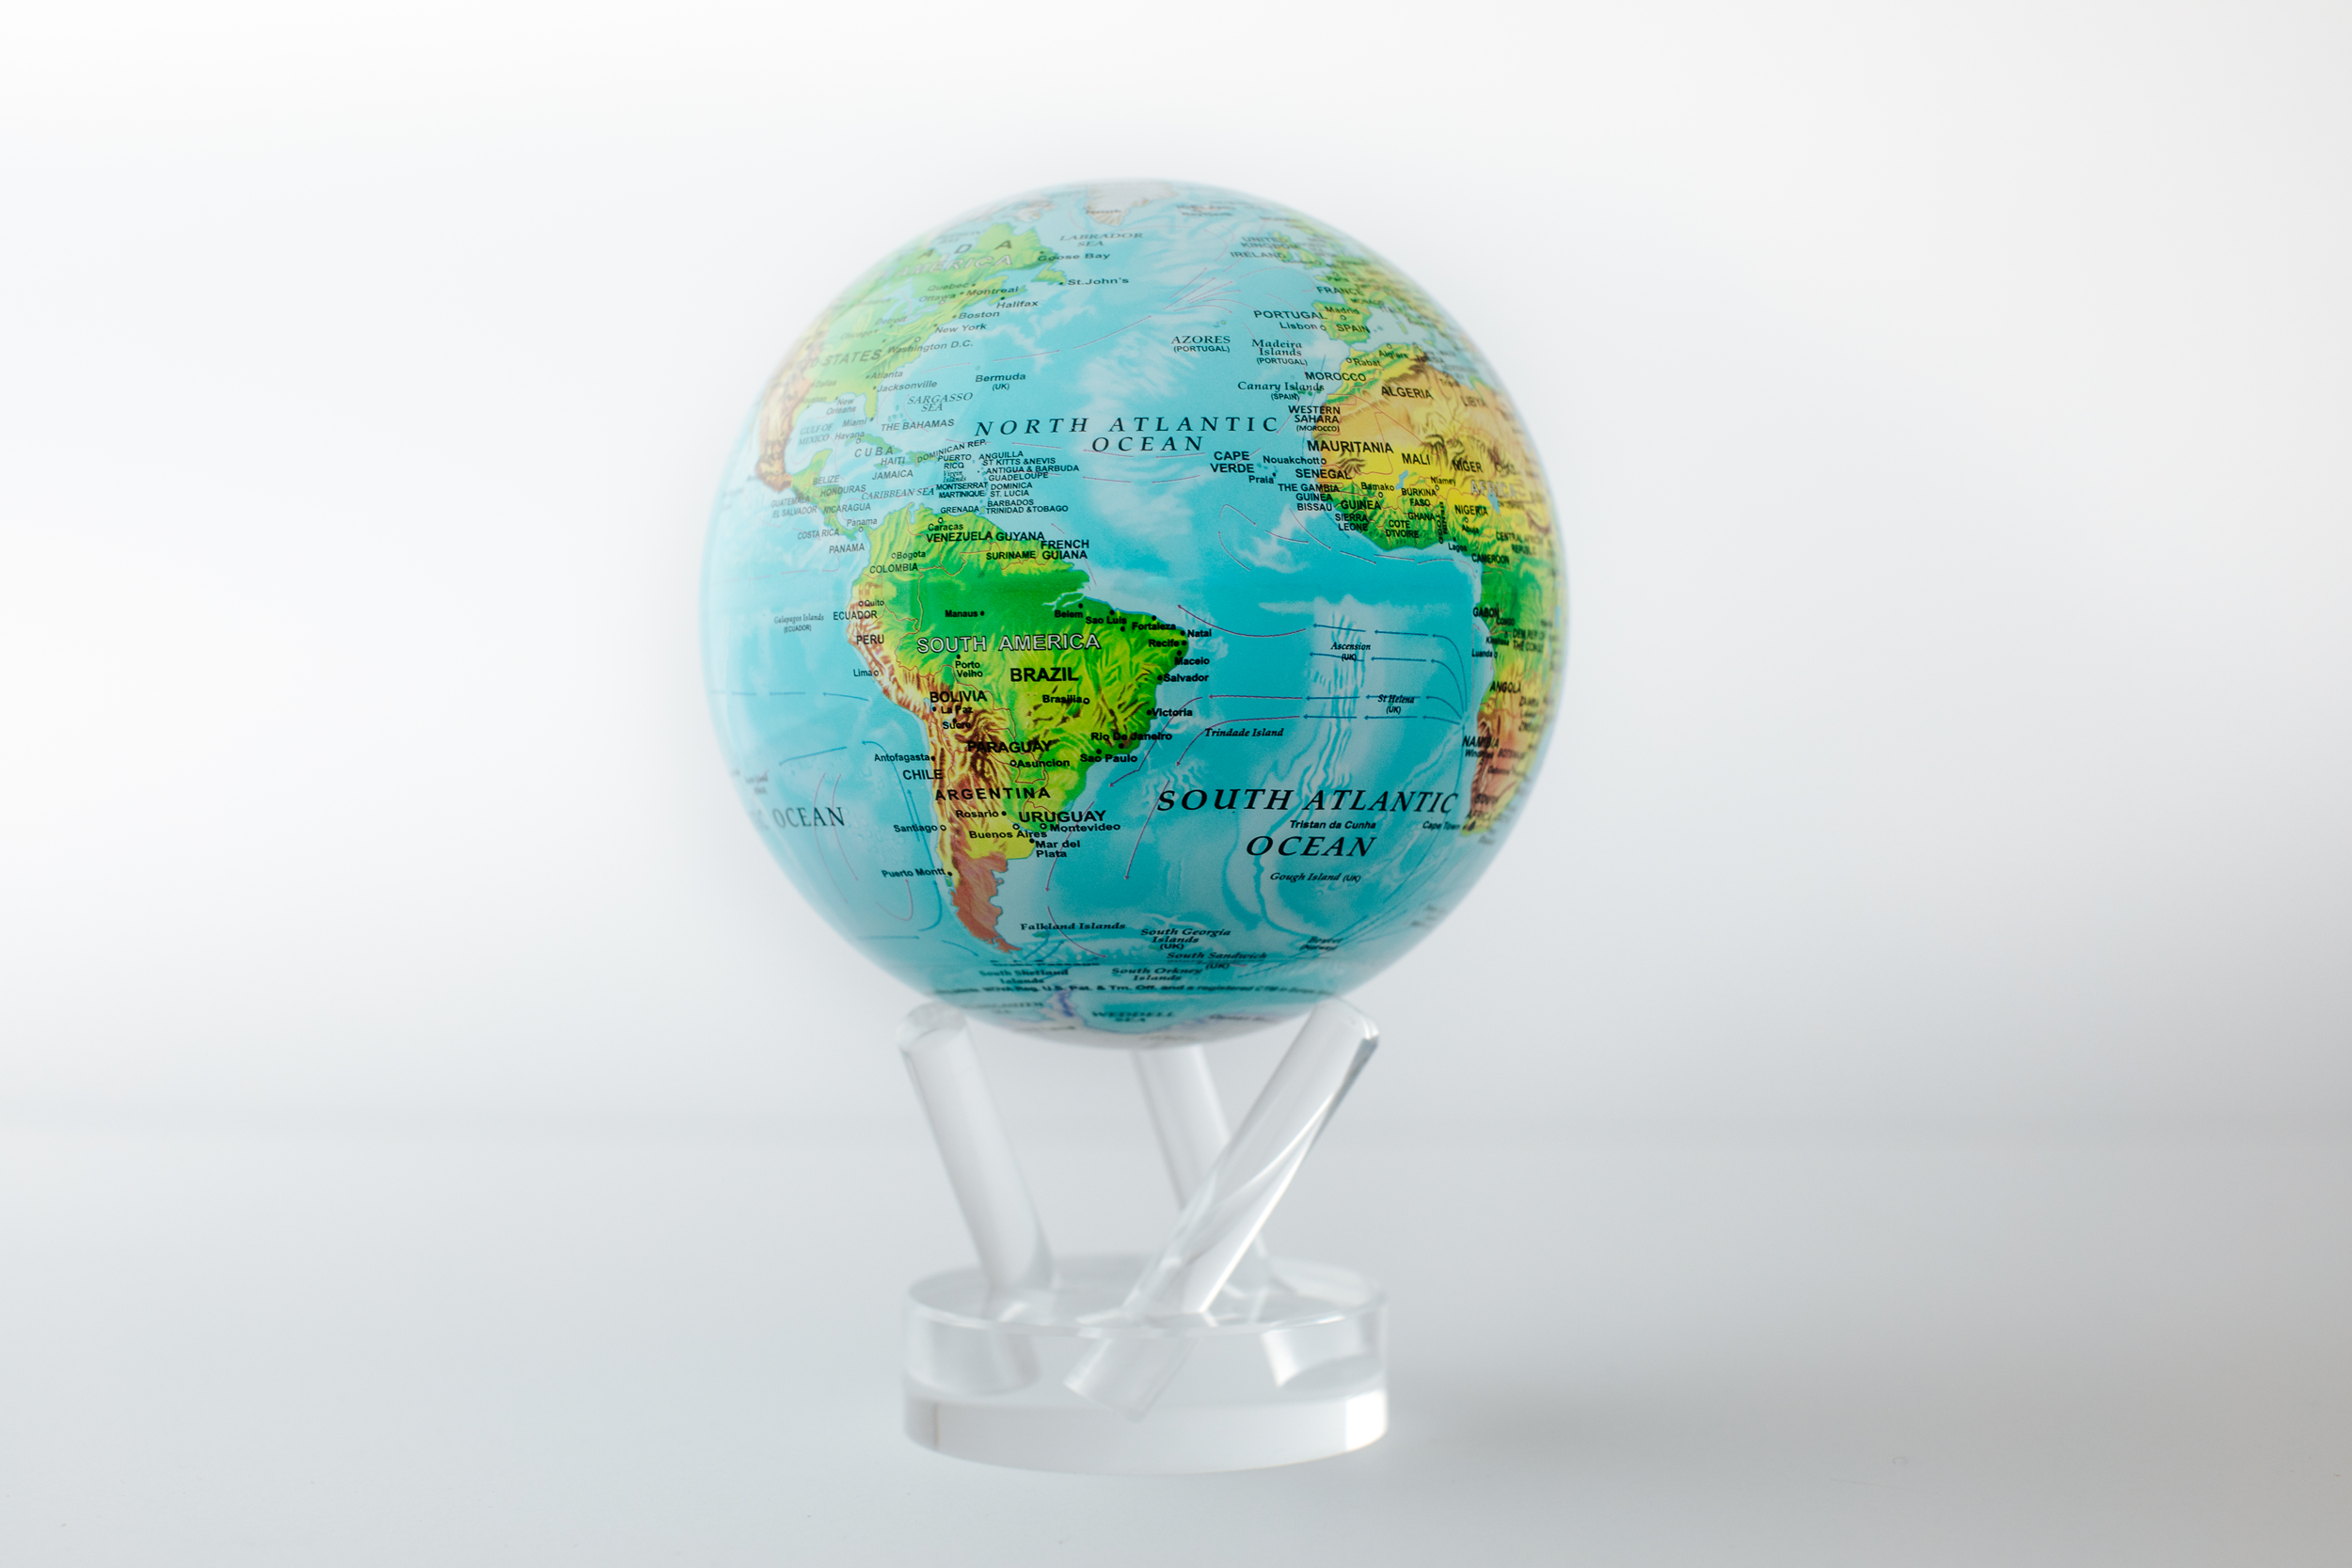 Blue Ocean Relief Map World Globe - Beauty is in the Details